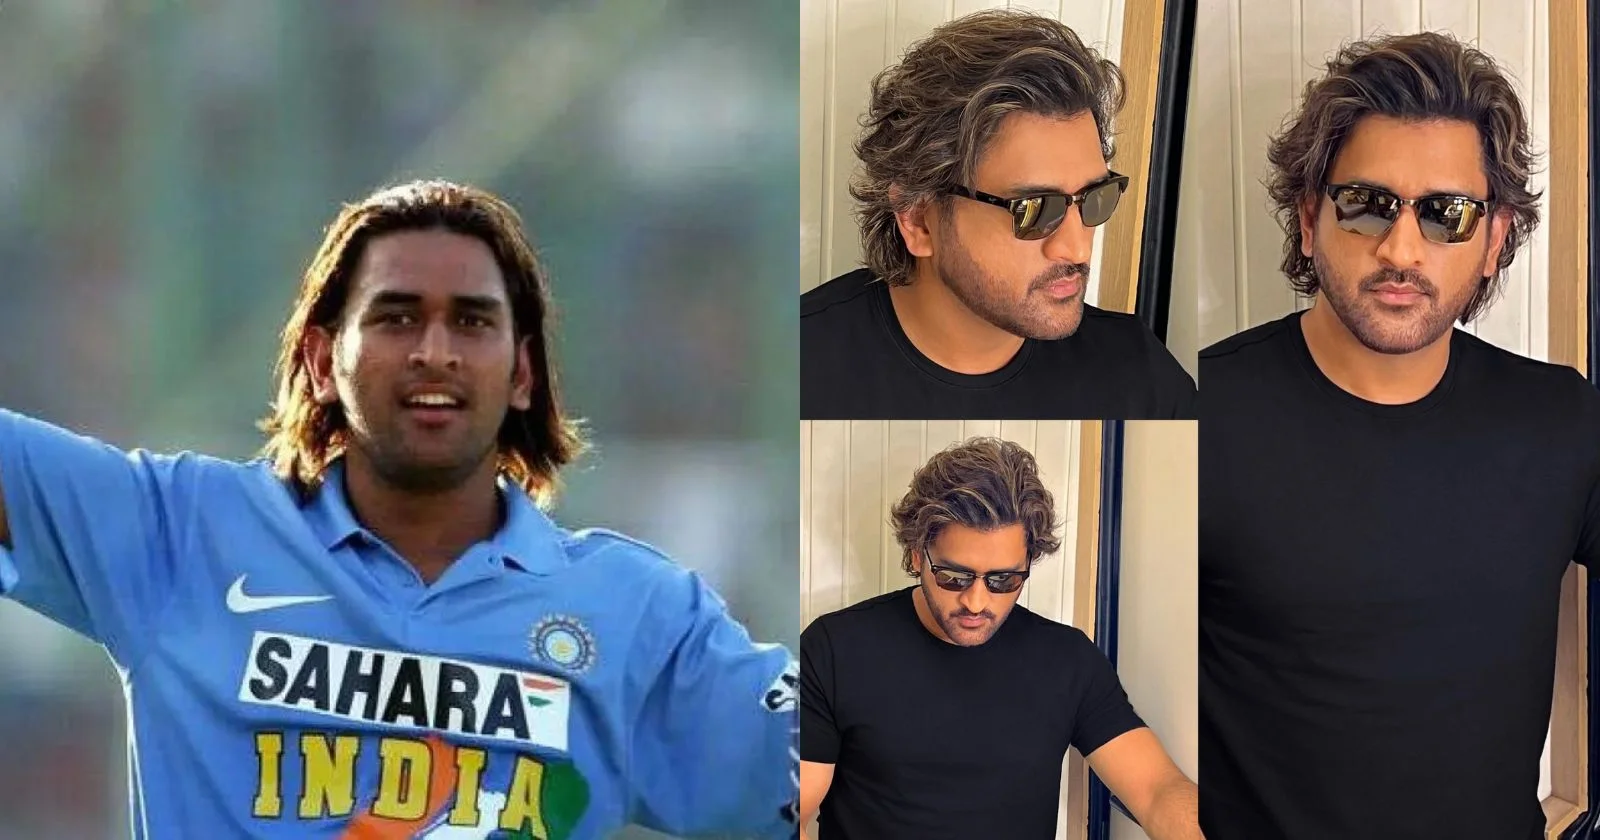 Tere Naam Memes - Happy Birthday Ms Dhoni ❤️ The greatest... | Facebook